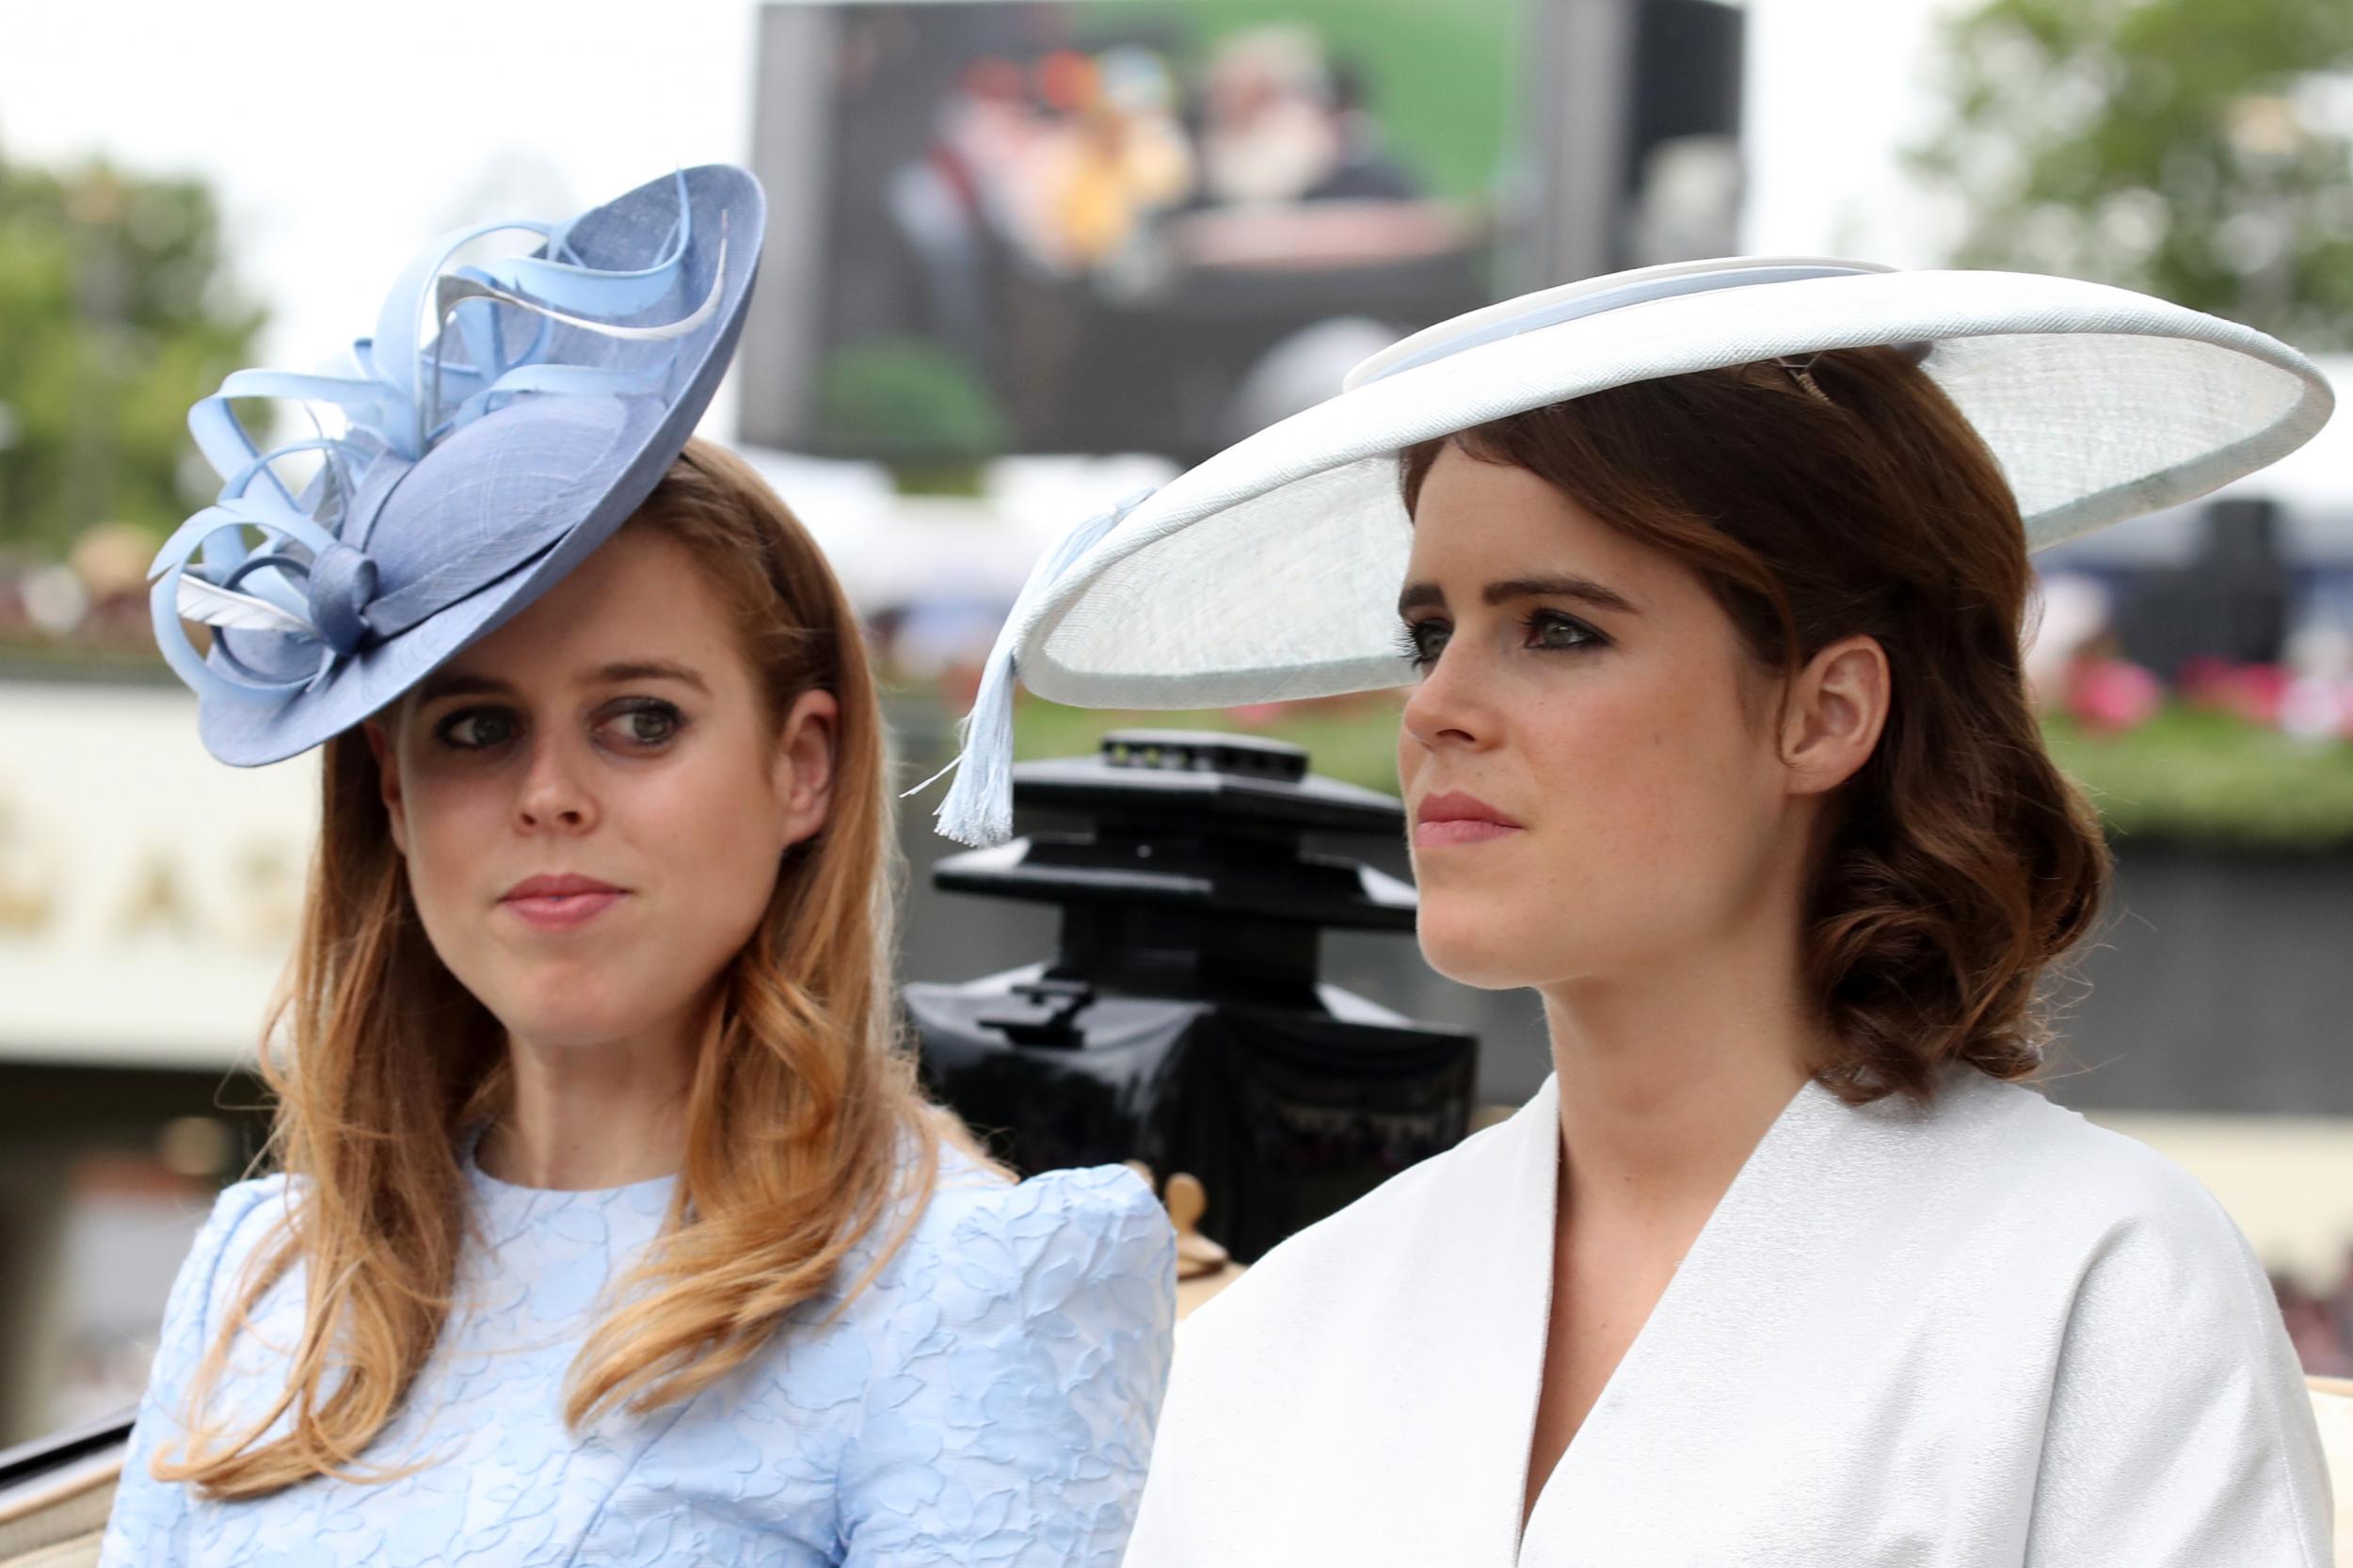 Princess Beatrice pictured alongside Princess Eugenie at Royal Ascot 2018